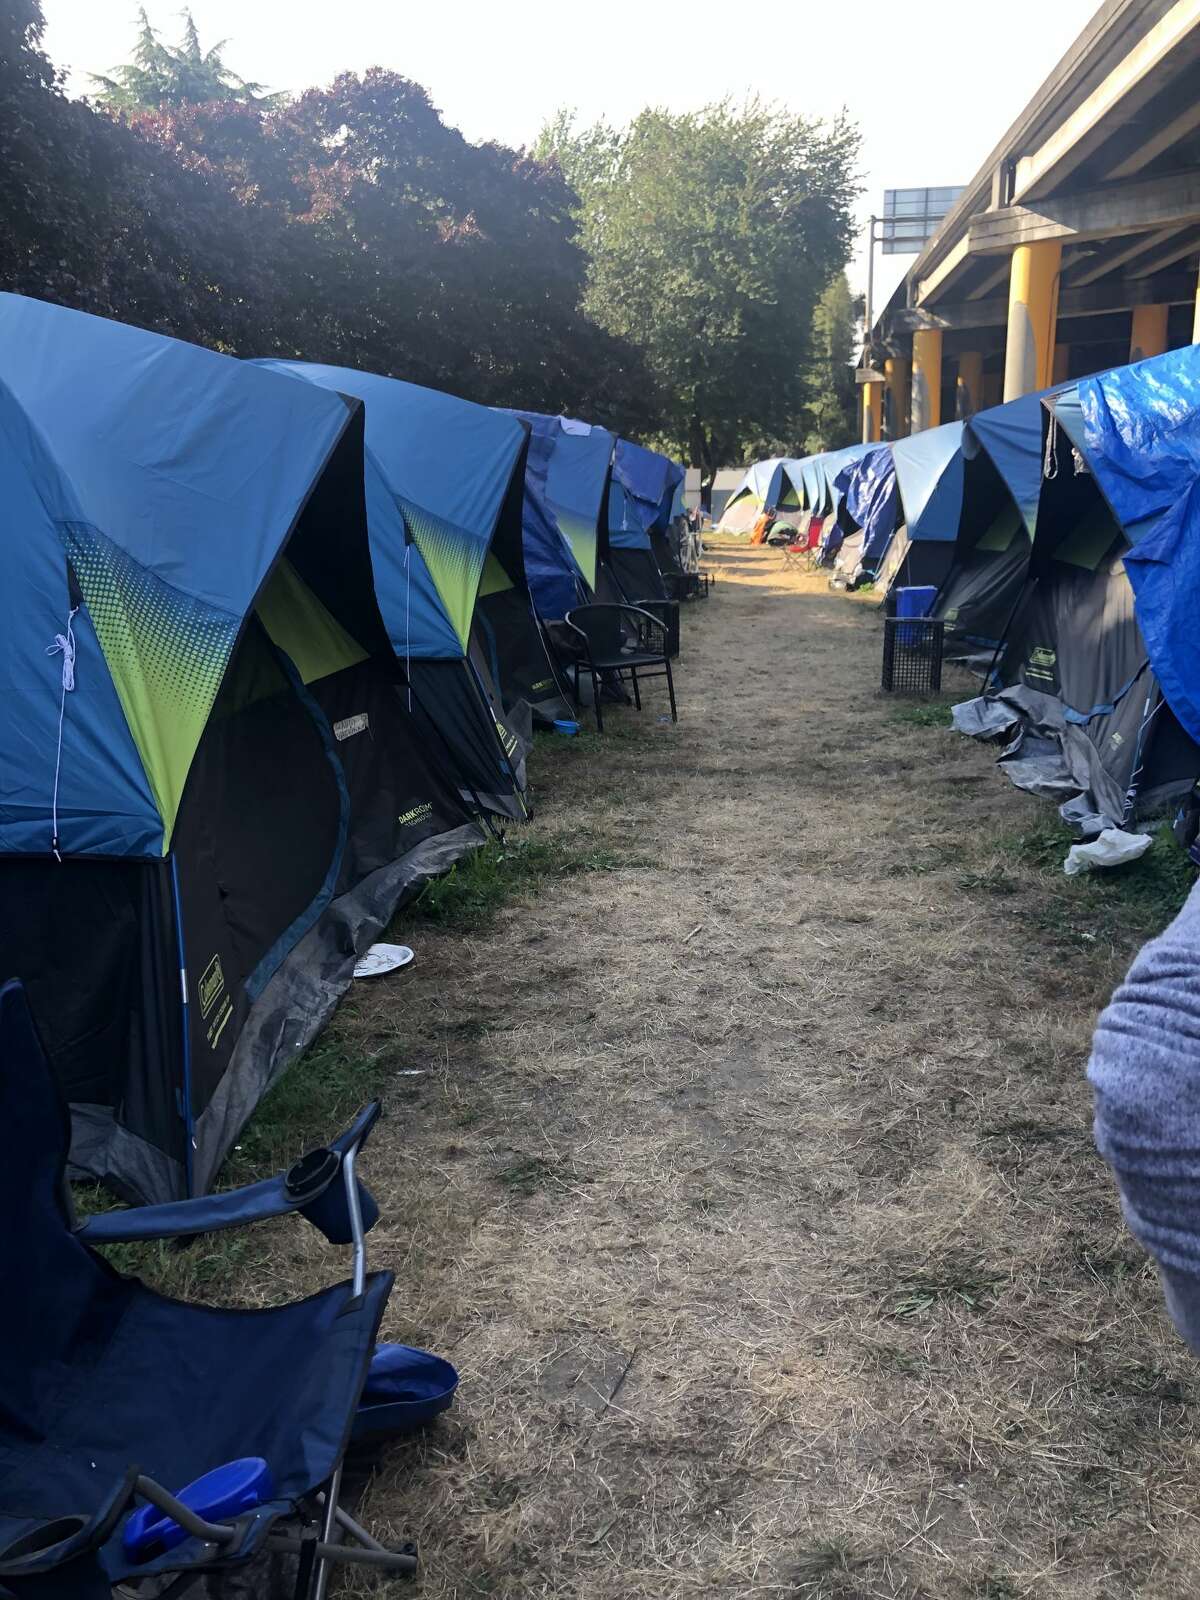 Tent City 3, currently located in Ravenna, is preparing to move to a new location in Tukwila. The tent city can accommodate up to 120 people and shelters individuals, couples, families, children and pets.